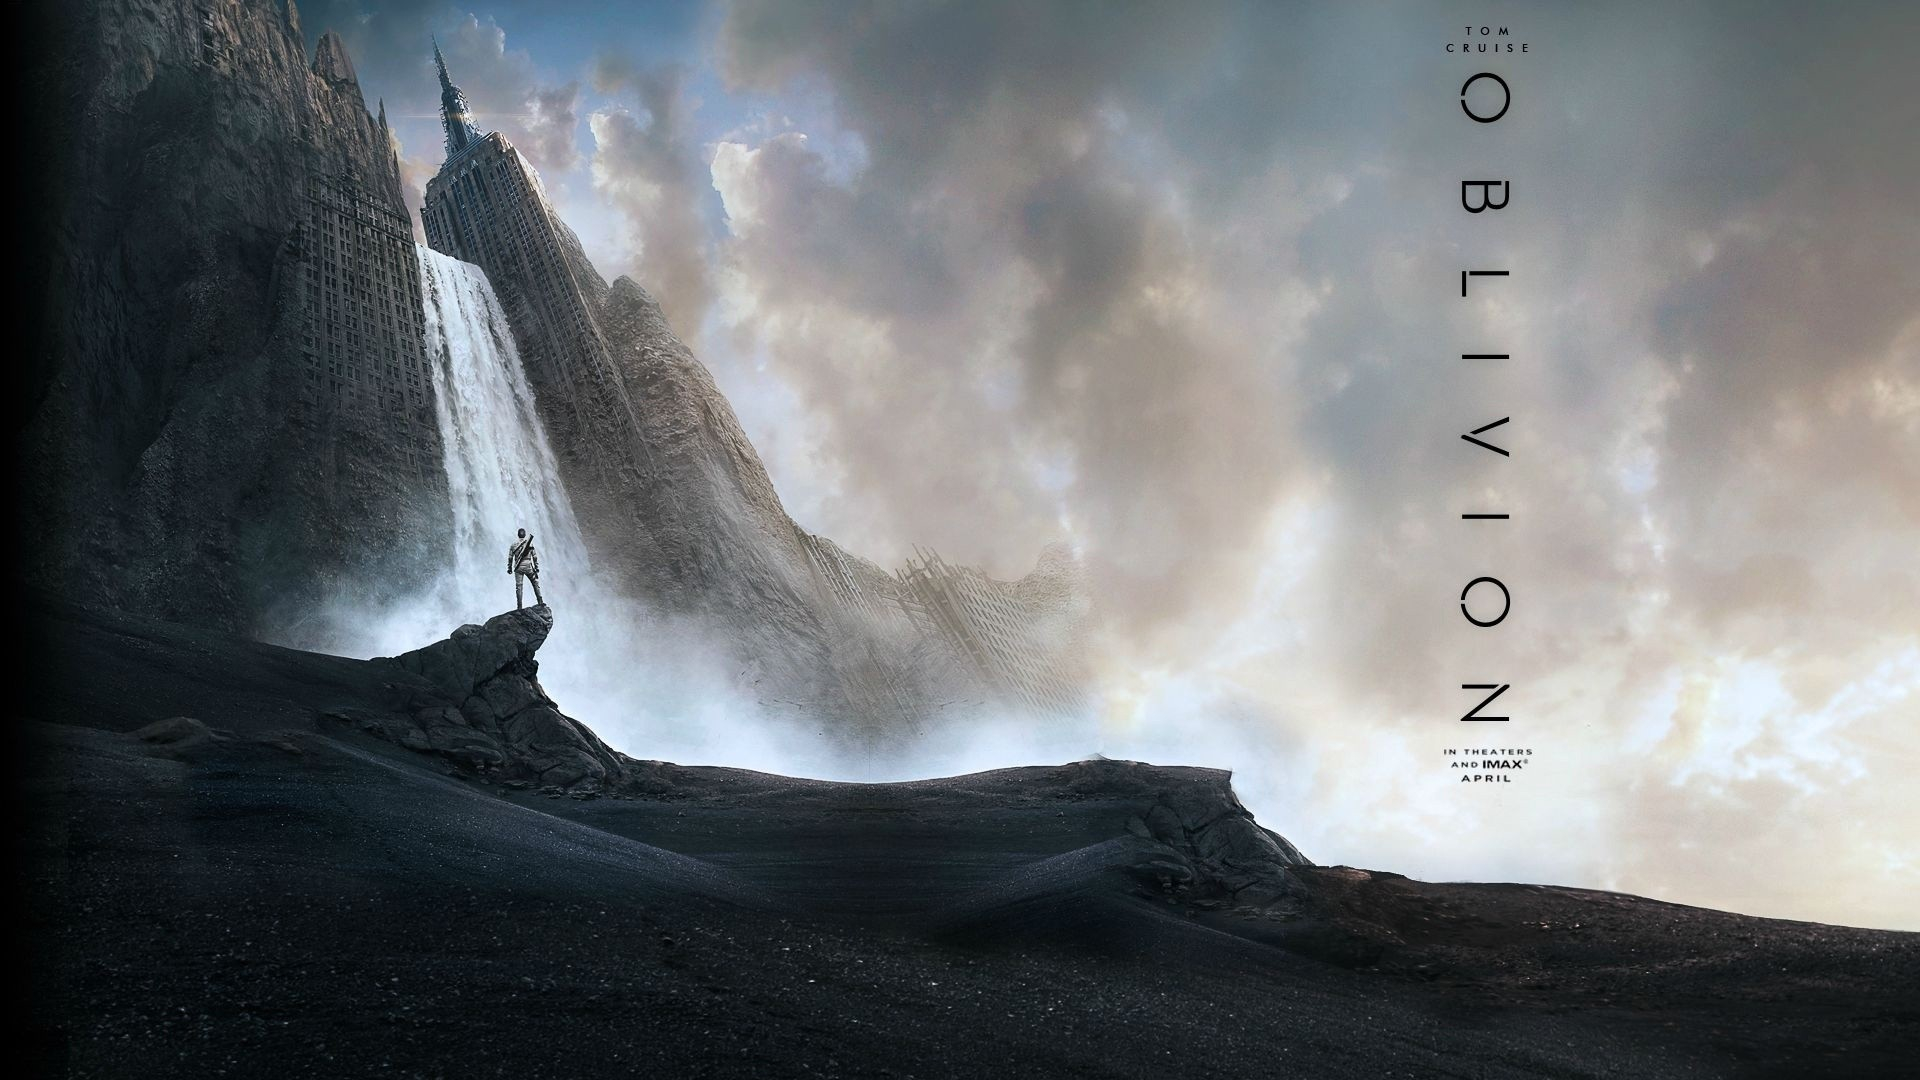 1920x1080 Wallpaper : movies, mist, Oblivion movie, cloud, mountain, wave, screenshot, px, atmospheric phenomenon, atmosphere of earth, geological phenomenon 4kWallpaper 615873 HD Wallpapers